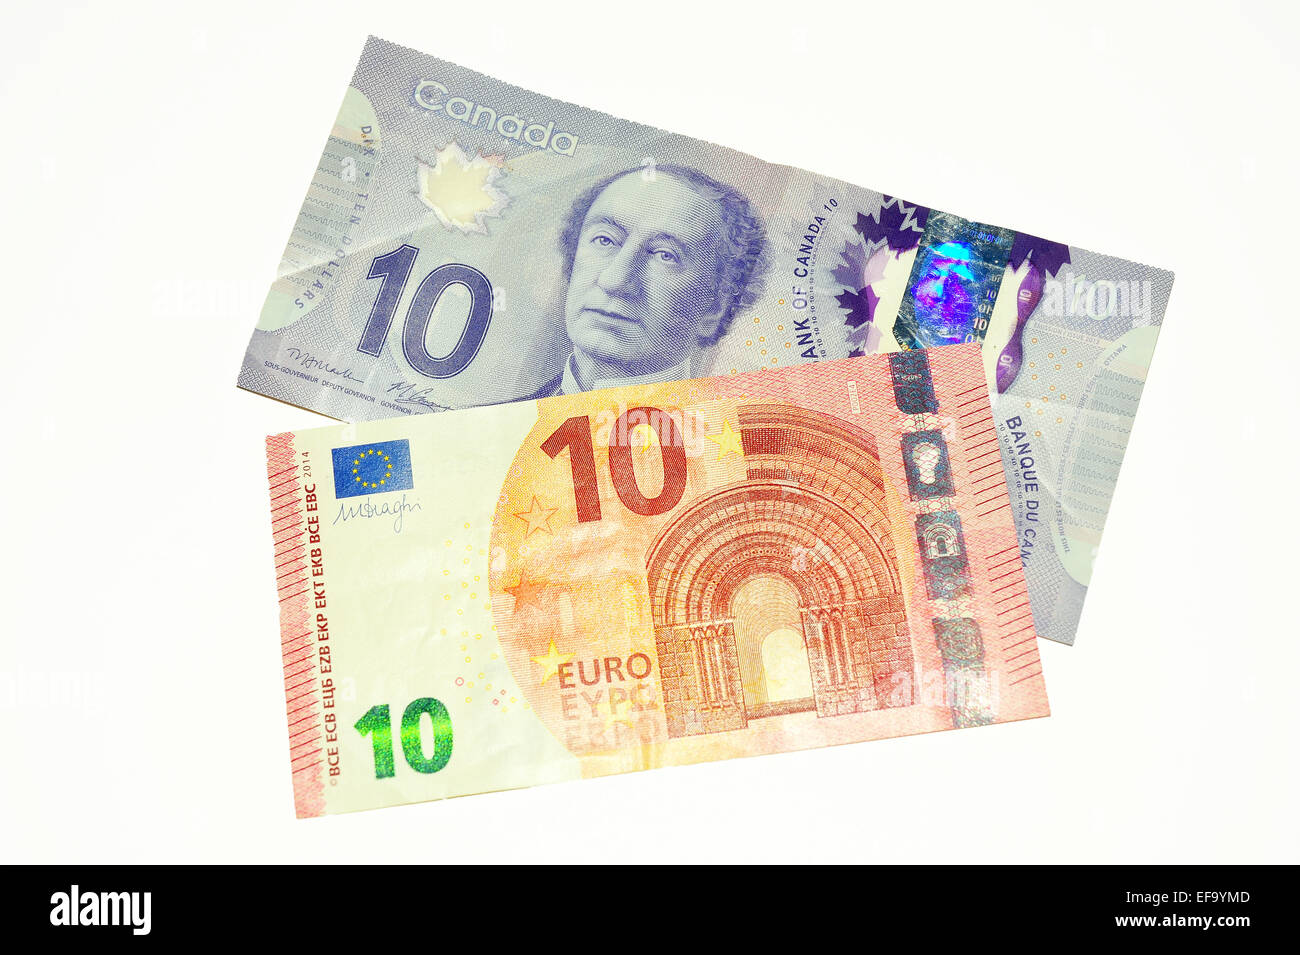 Canadian Dollar notes and European Euro notes photographed together